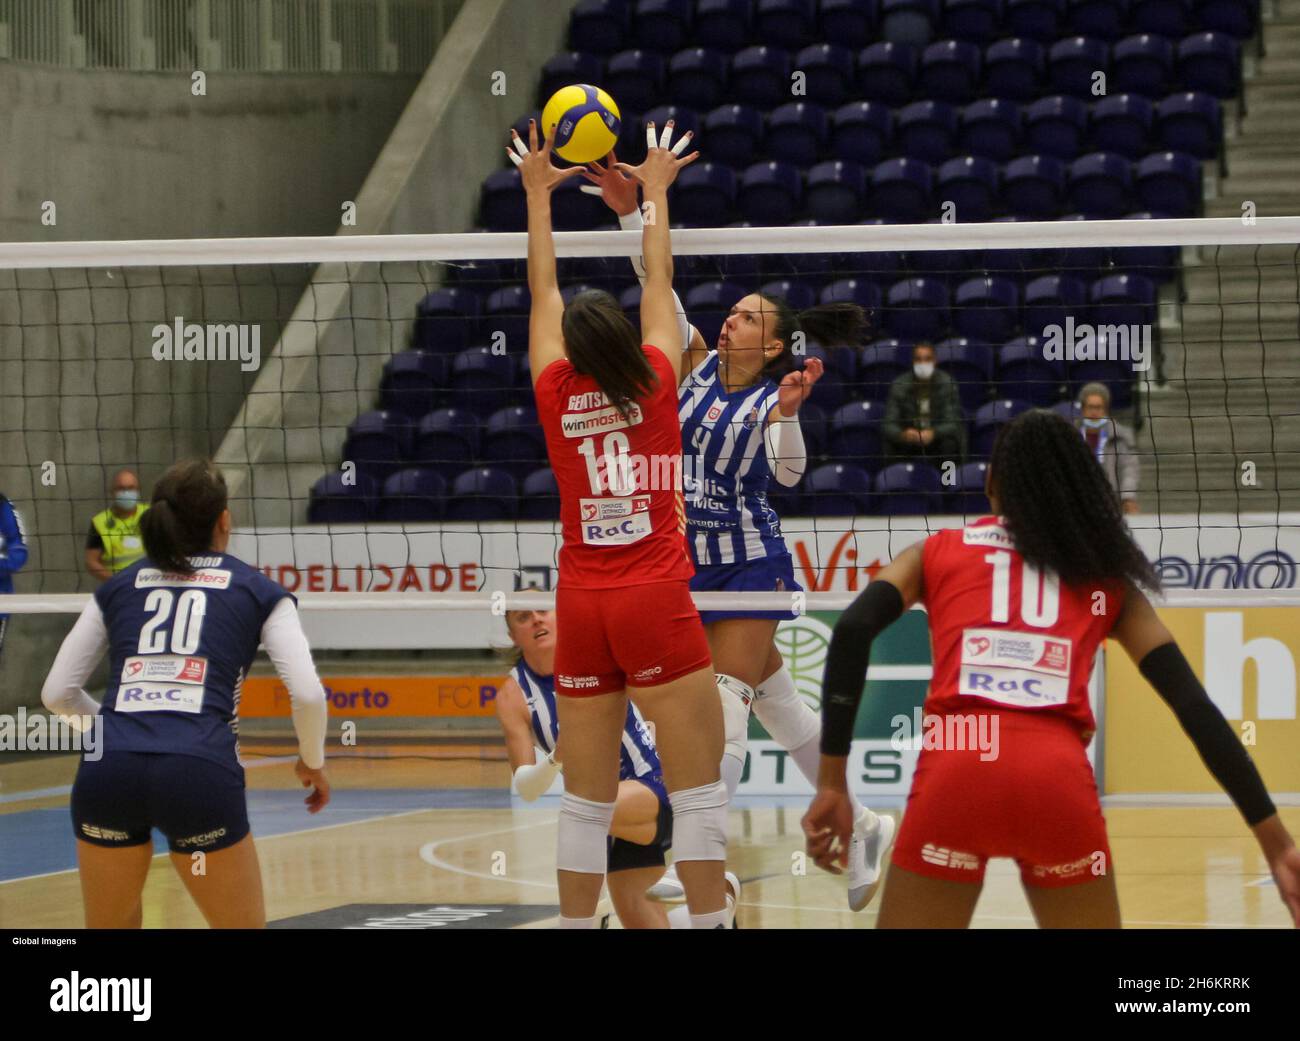 Porto, 11/16/2021 - This afternoon, AJM/FC Porto hosted the Olympiacos  Volleyball Women, at Pavilhão Dragão Arena in Porto, in a game counting for  the CEV Women's Volleyball Cup 2021/22 - 1/16 Final -